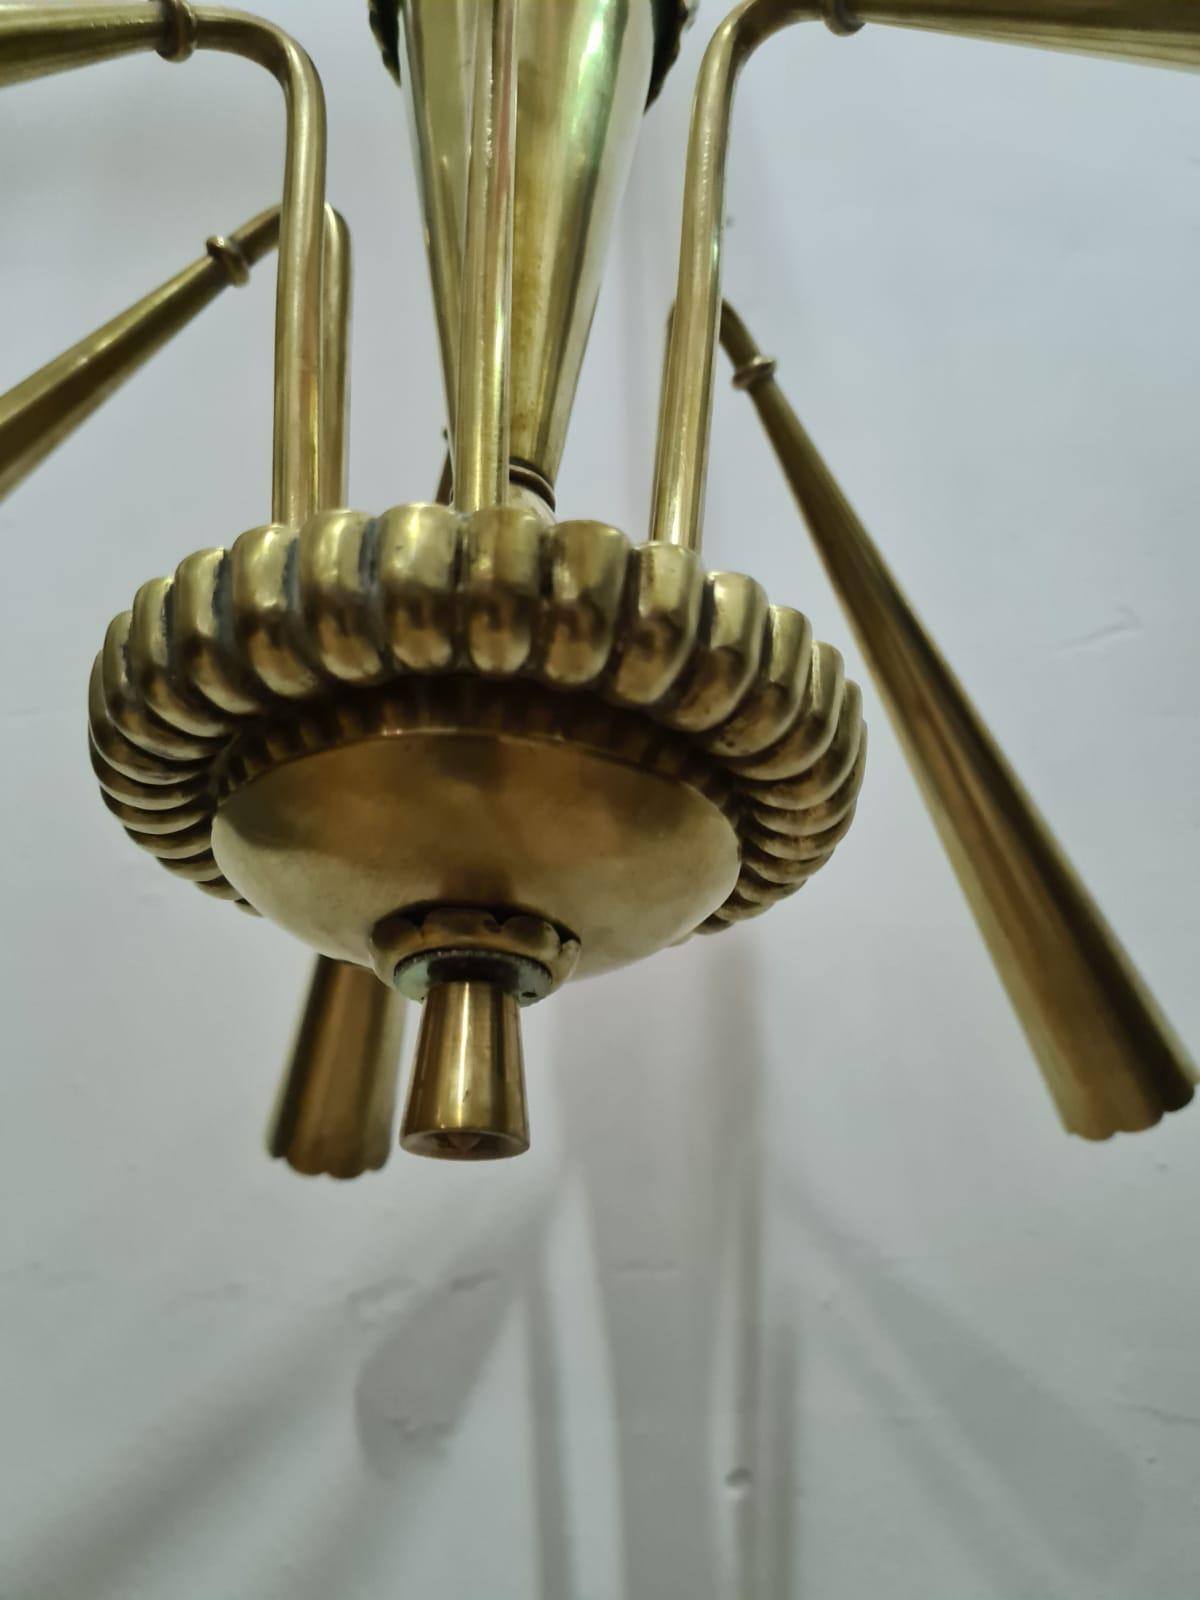 6-light brass chandelier 1950, Italian production, in perfect condition.